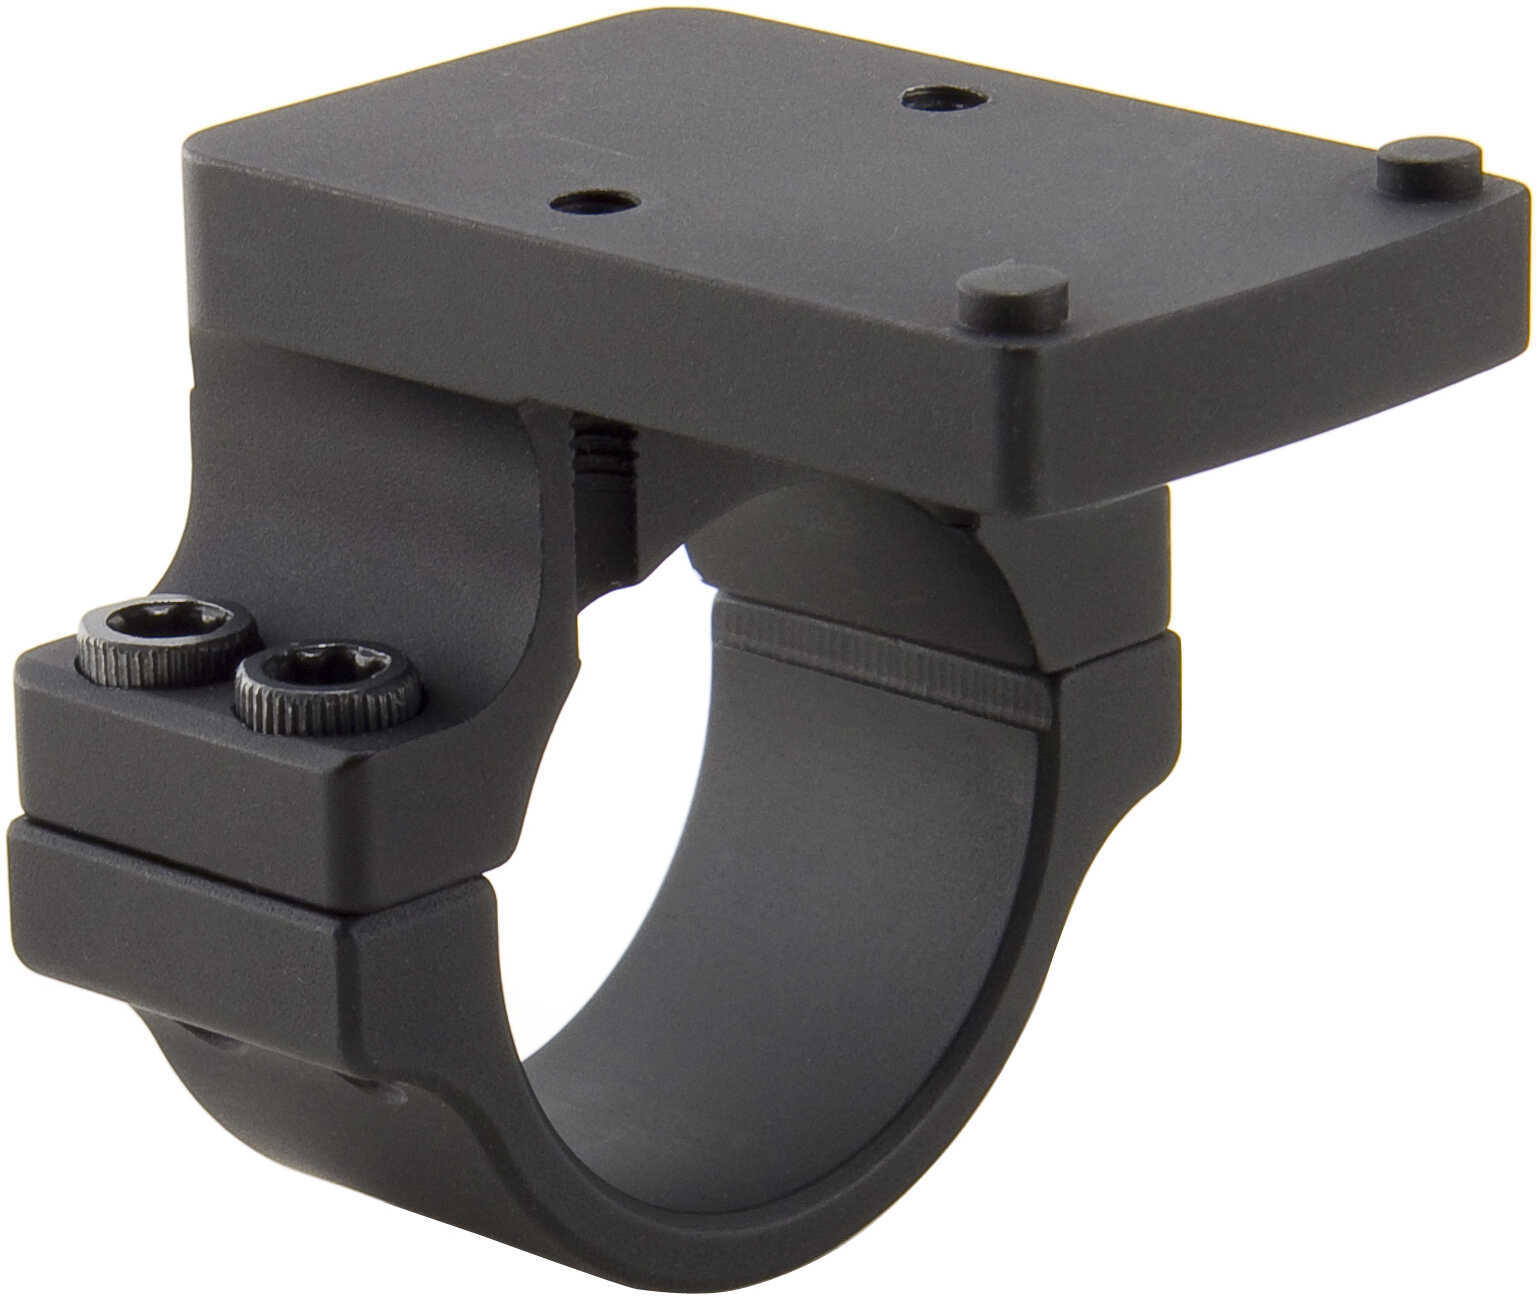 Trijicon Optic Mount Fits 30mm Tube Adaptor Plate for RMR and SRO Matte Finish Black AC32028